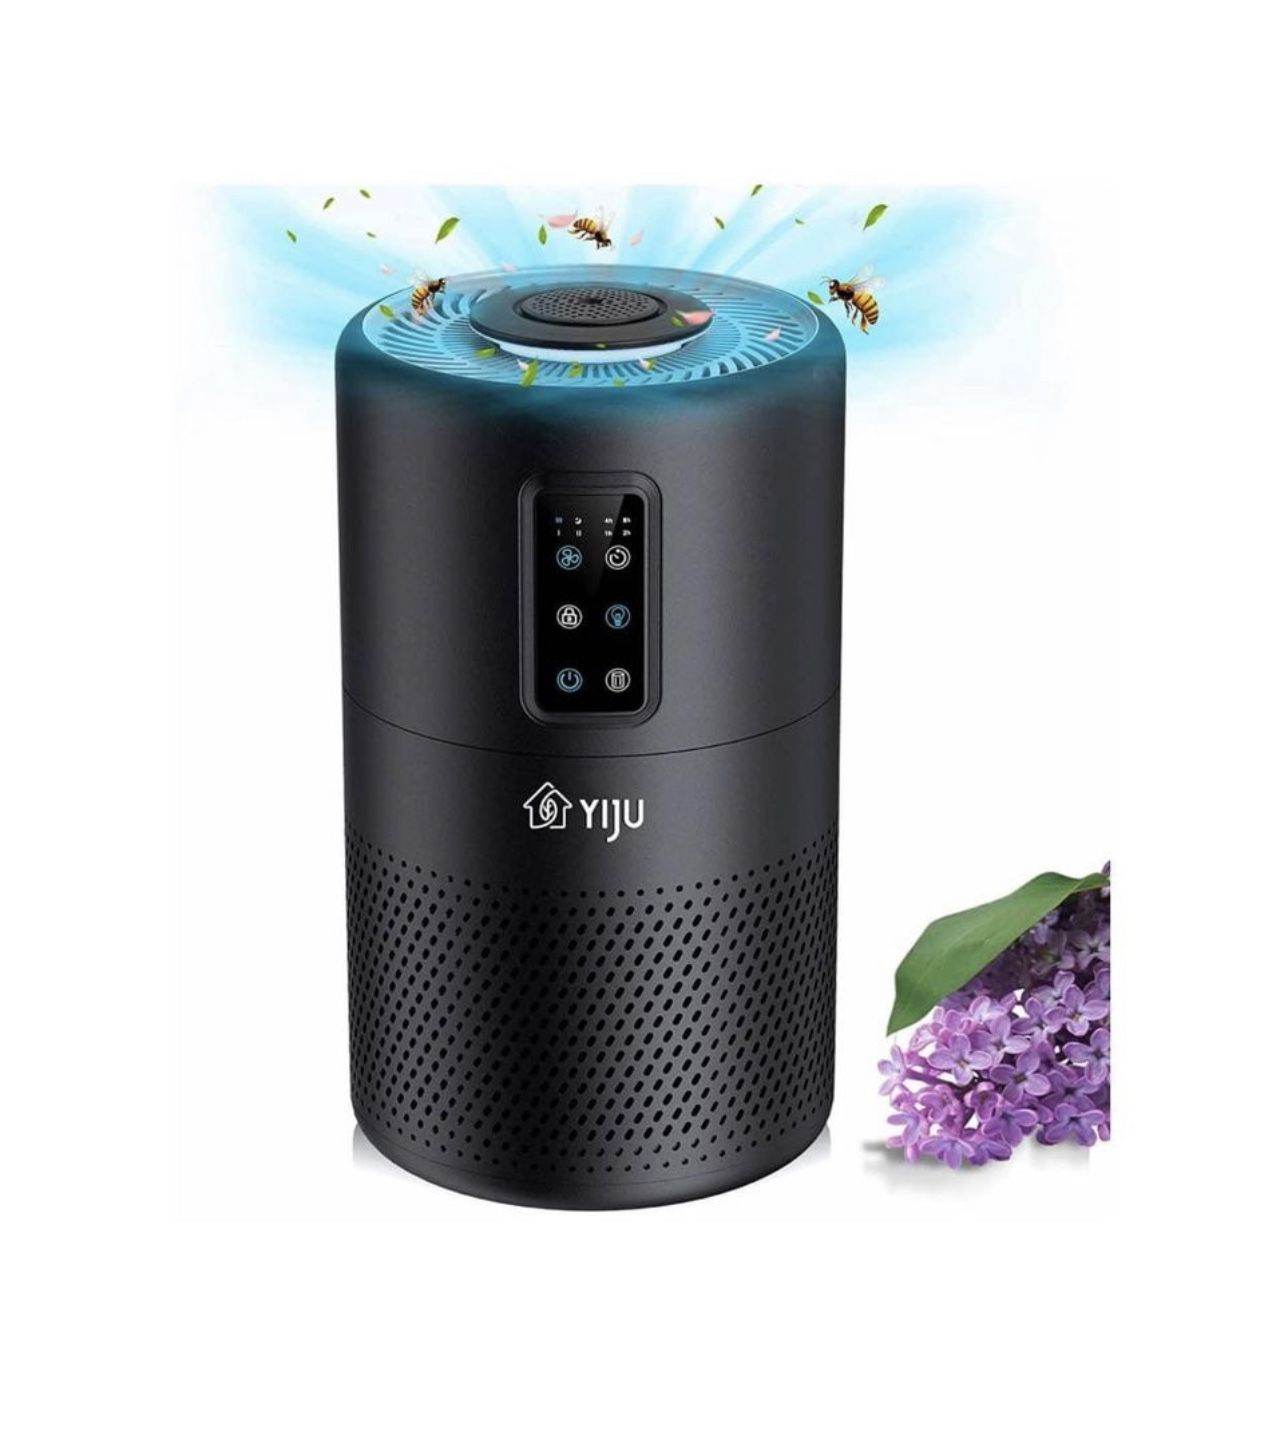 ☘️ $50 Brand New In Box  Air Purifiers